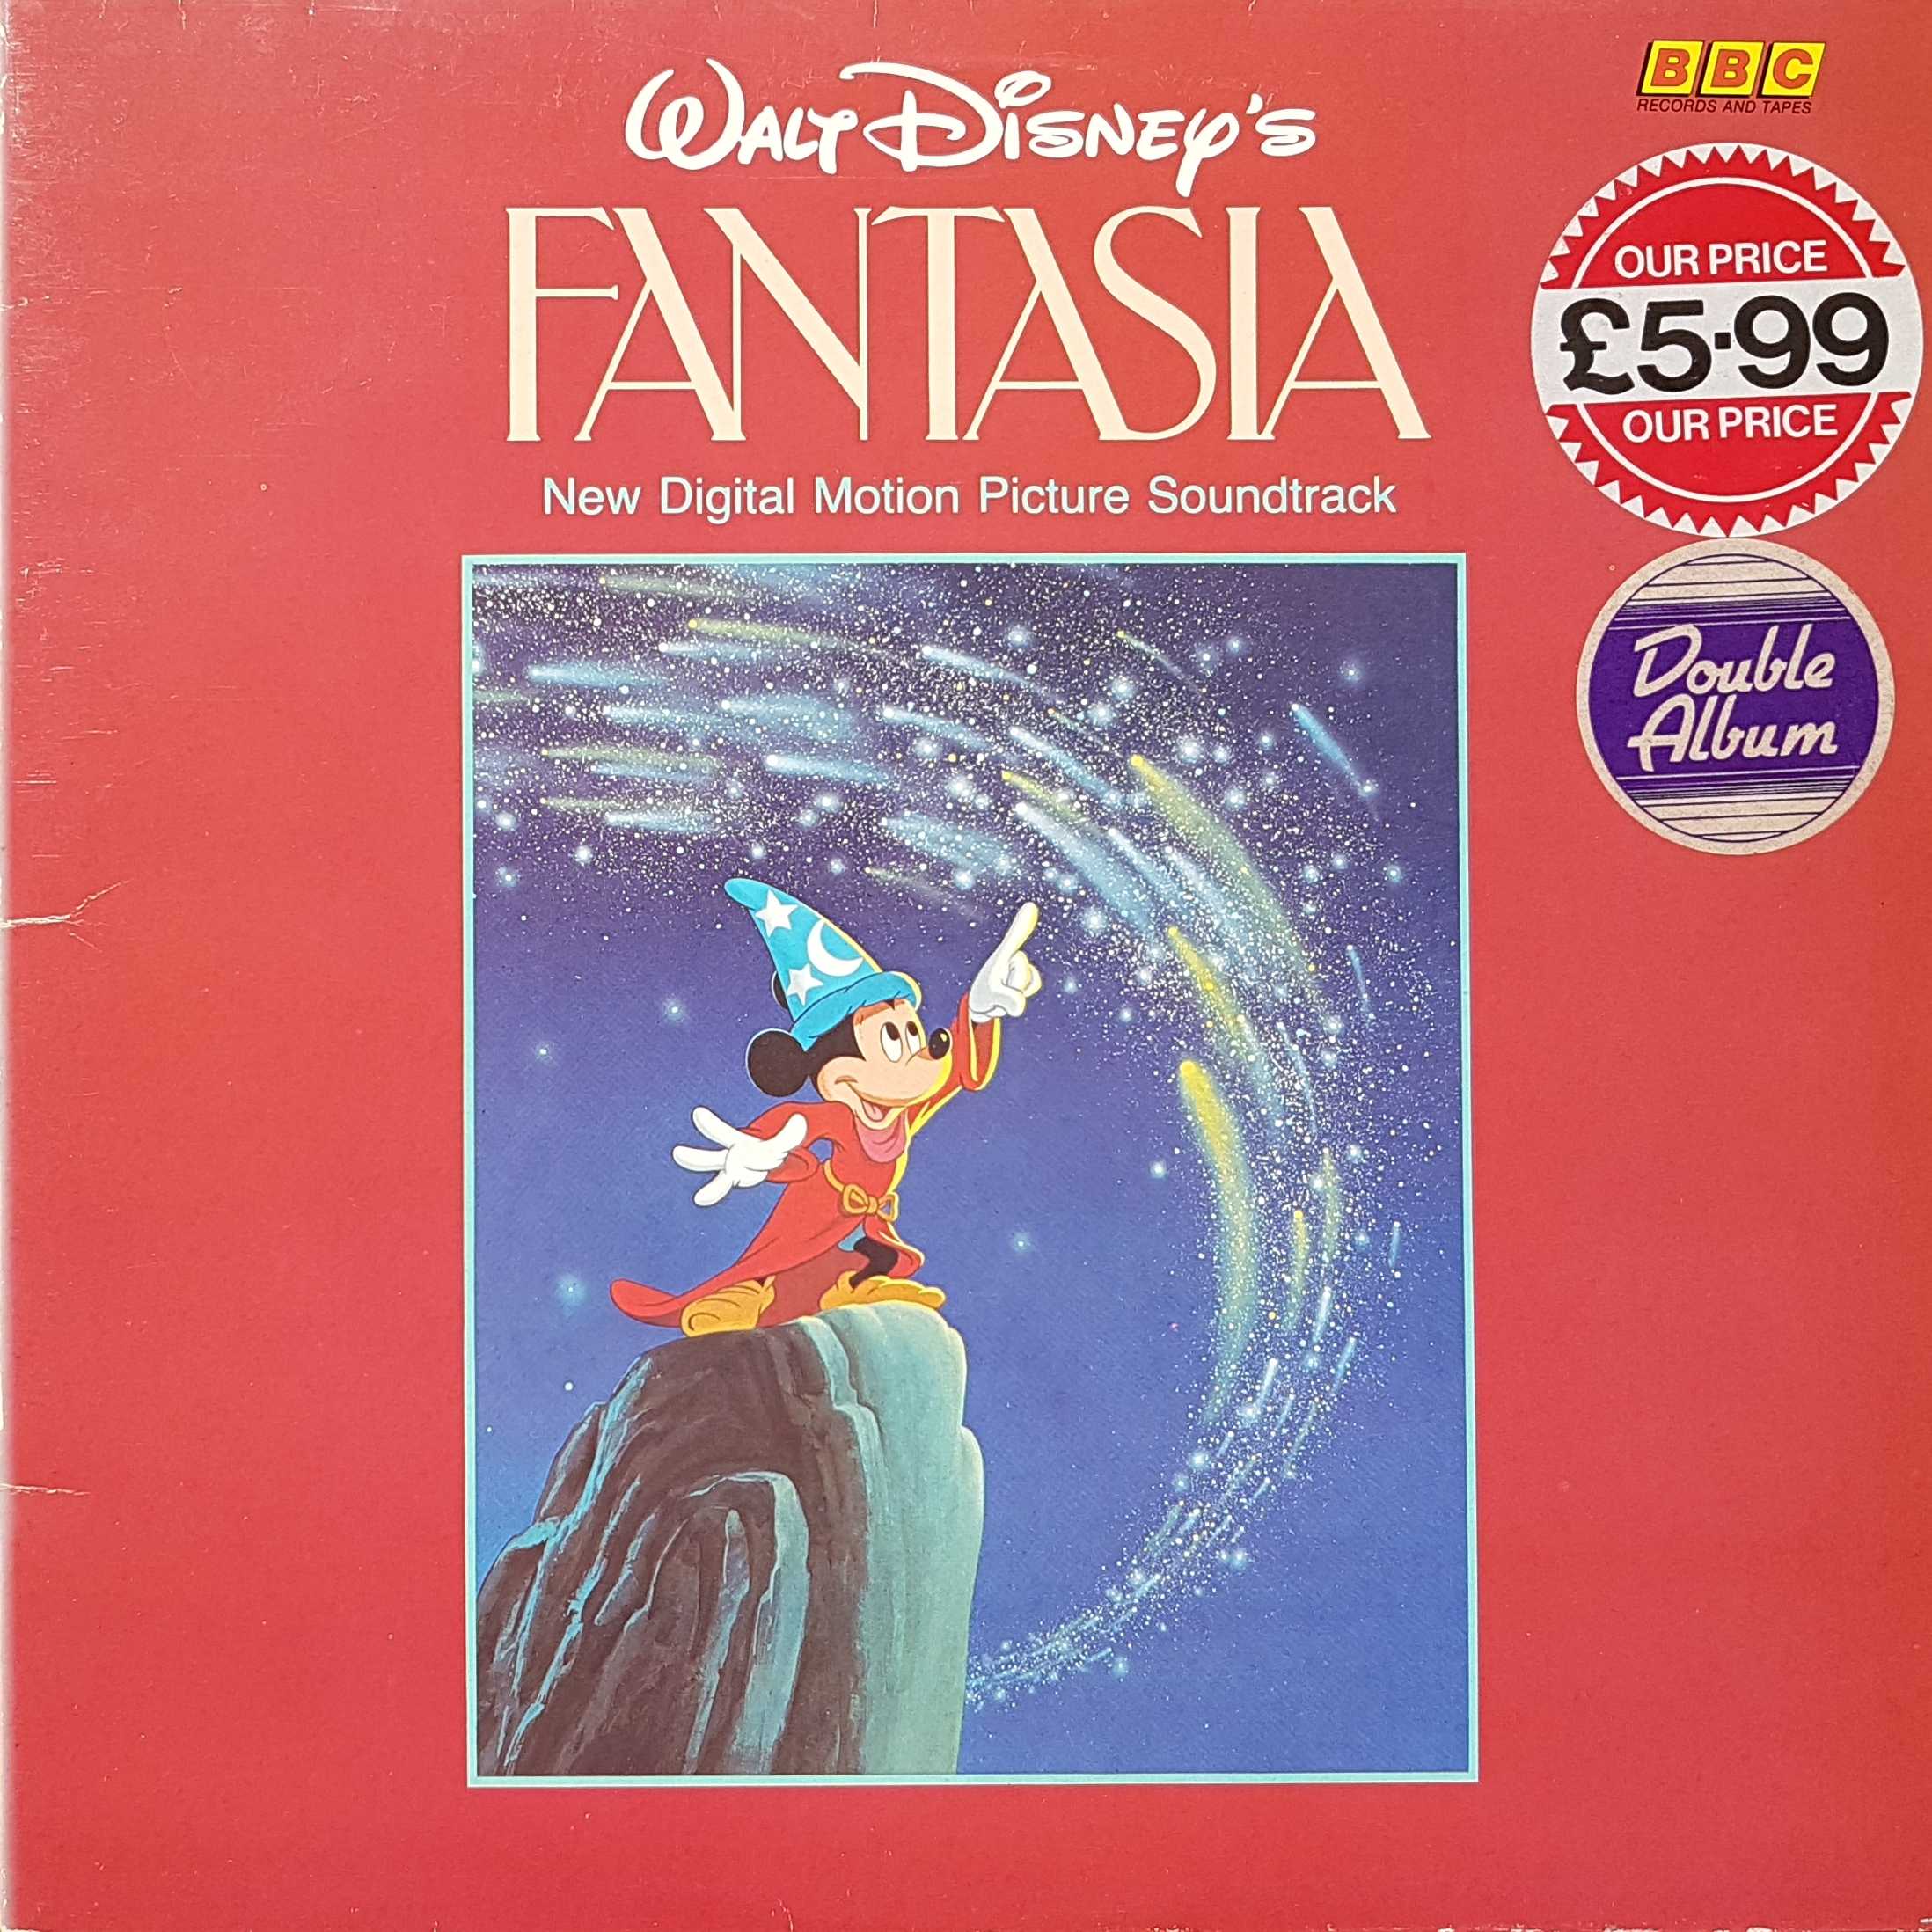 Picture of REQ 537 Fantasia by artist Various from the BBC albums - Records and Tapes library